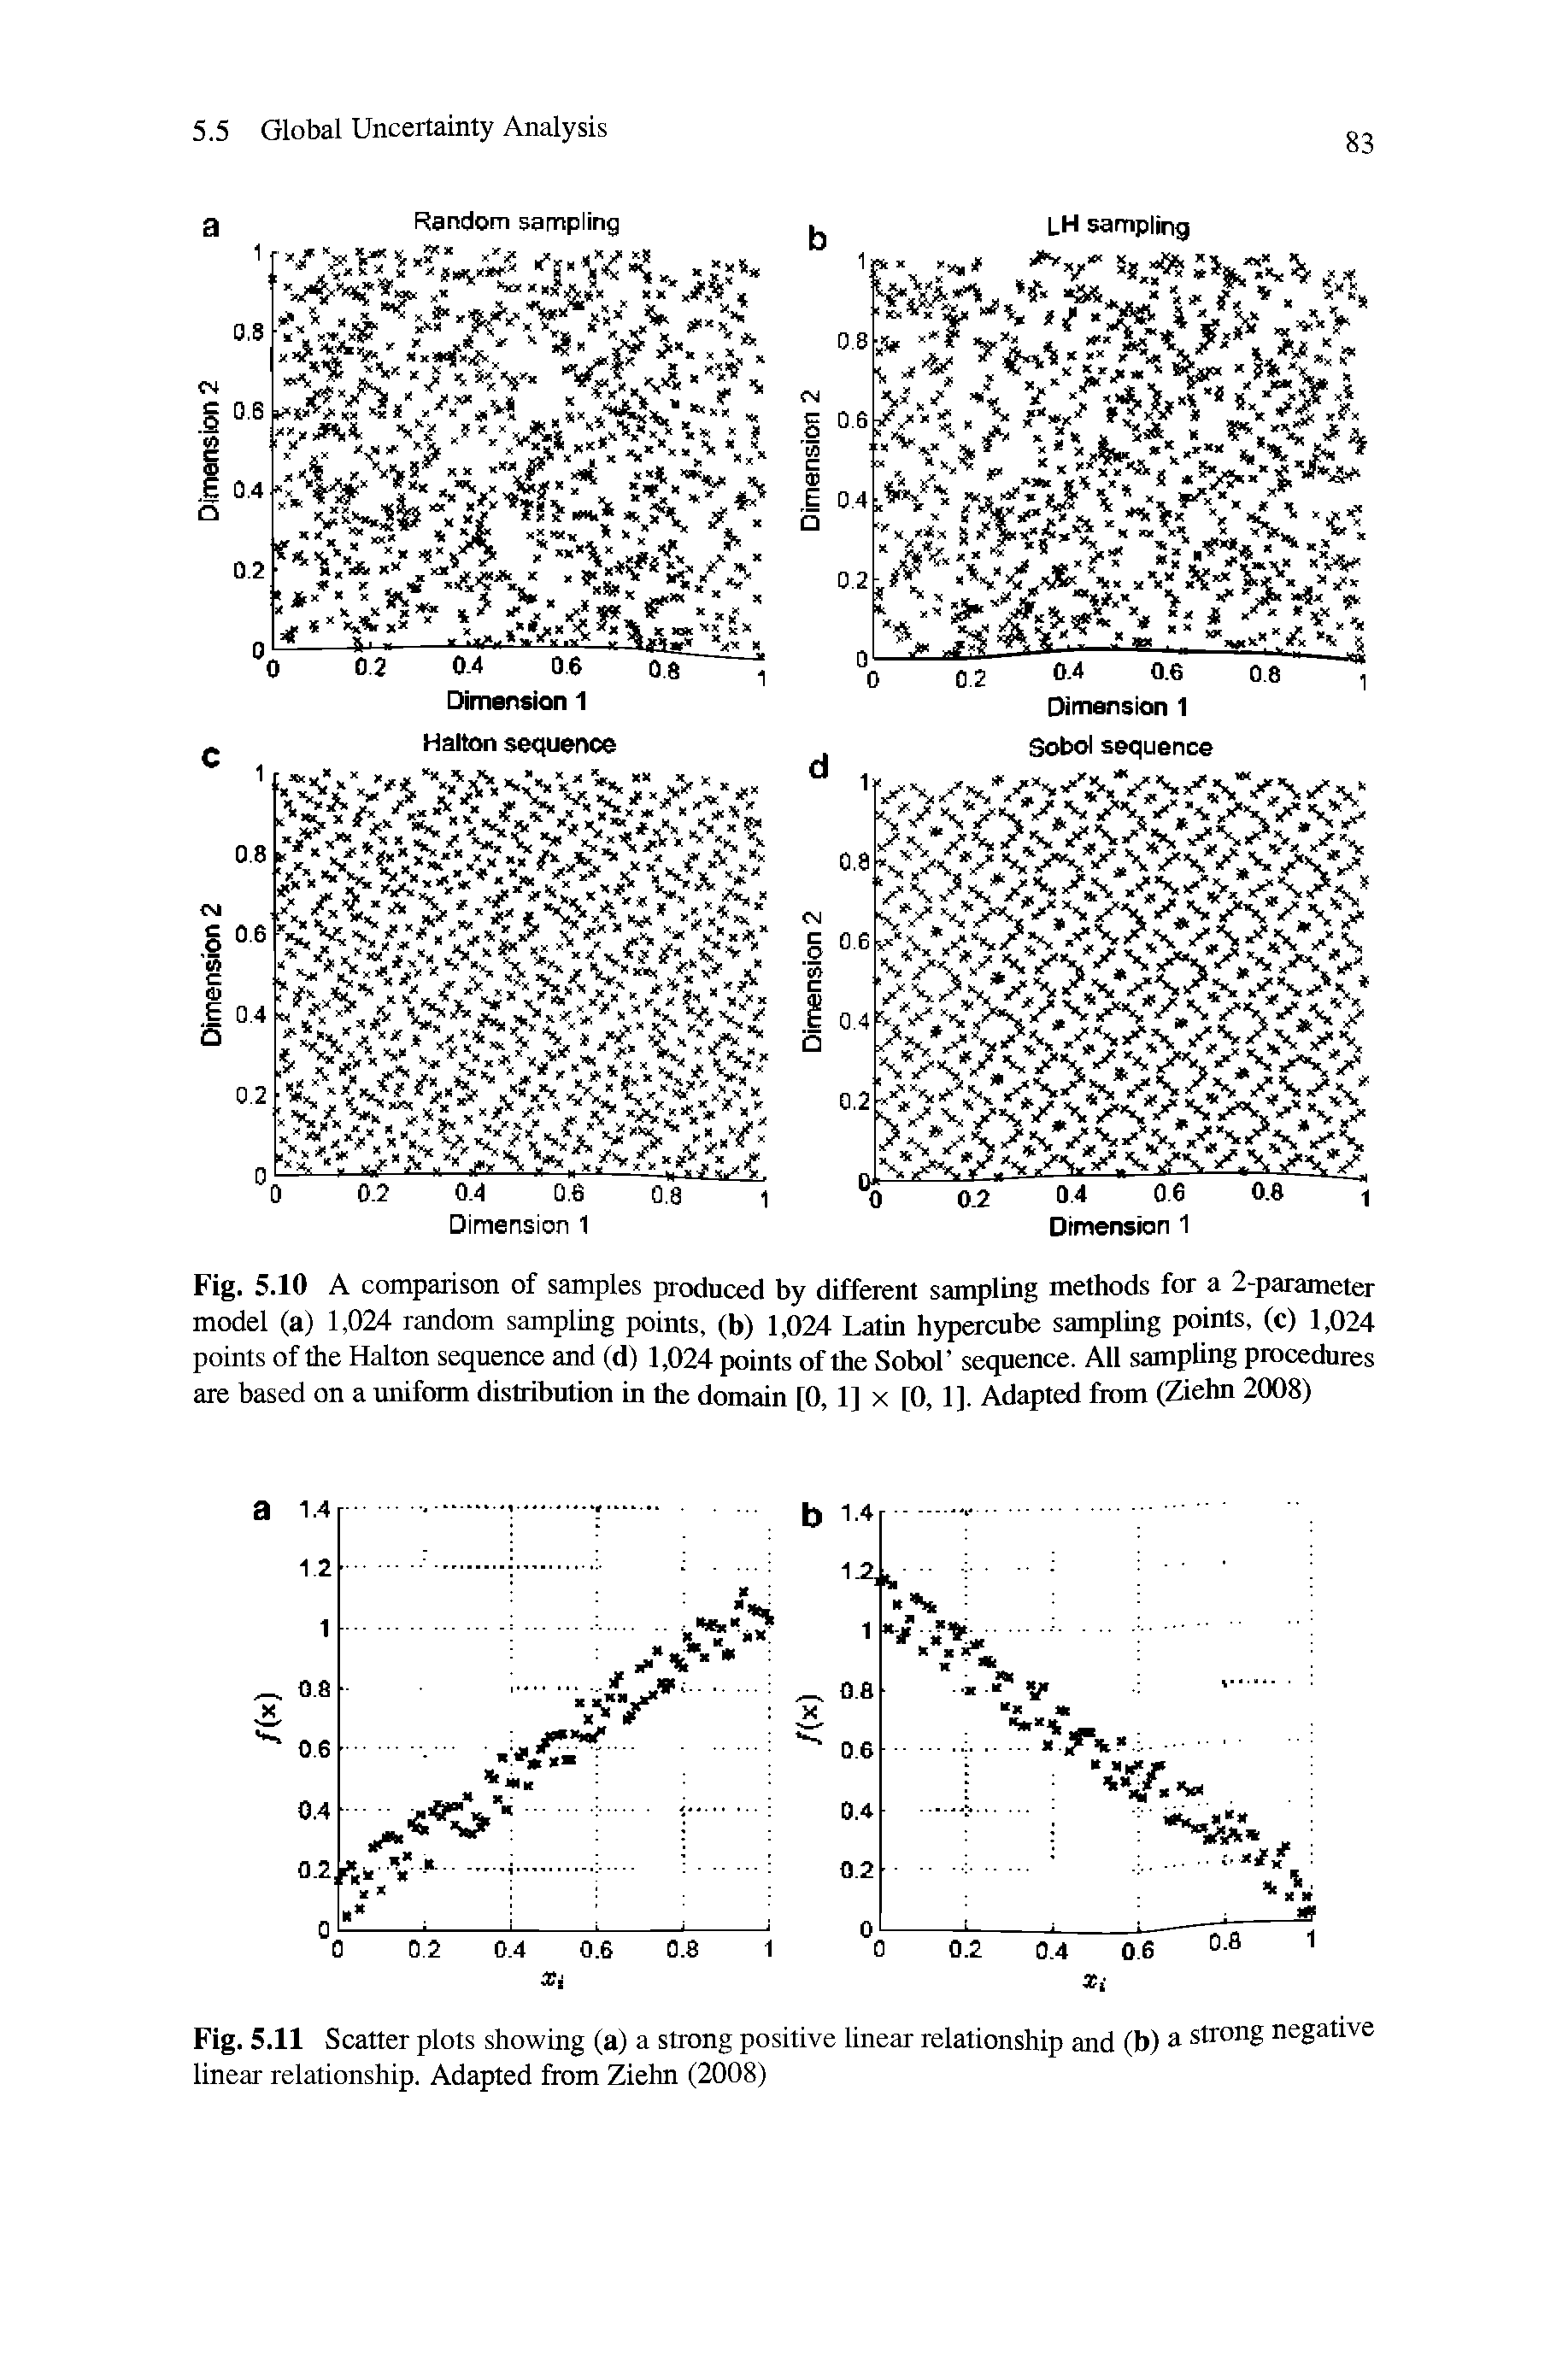 Fig. 5.10 A comparison of samples produced by different sampling methods for a 2-parameter model (a) 1,024 random sampling points, (b) 1,024 Latin hypercube sampling points, (c) 1,024 points of the Halton sequence and (d) 1,024 points of the Sobol sequence. All sampling procedures are based on a uniform distribution in the domain [0, 1] x [0, 1]. Adapted from (Ziehn 2008)...